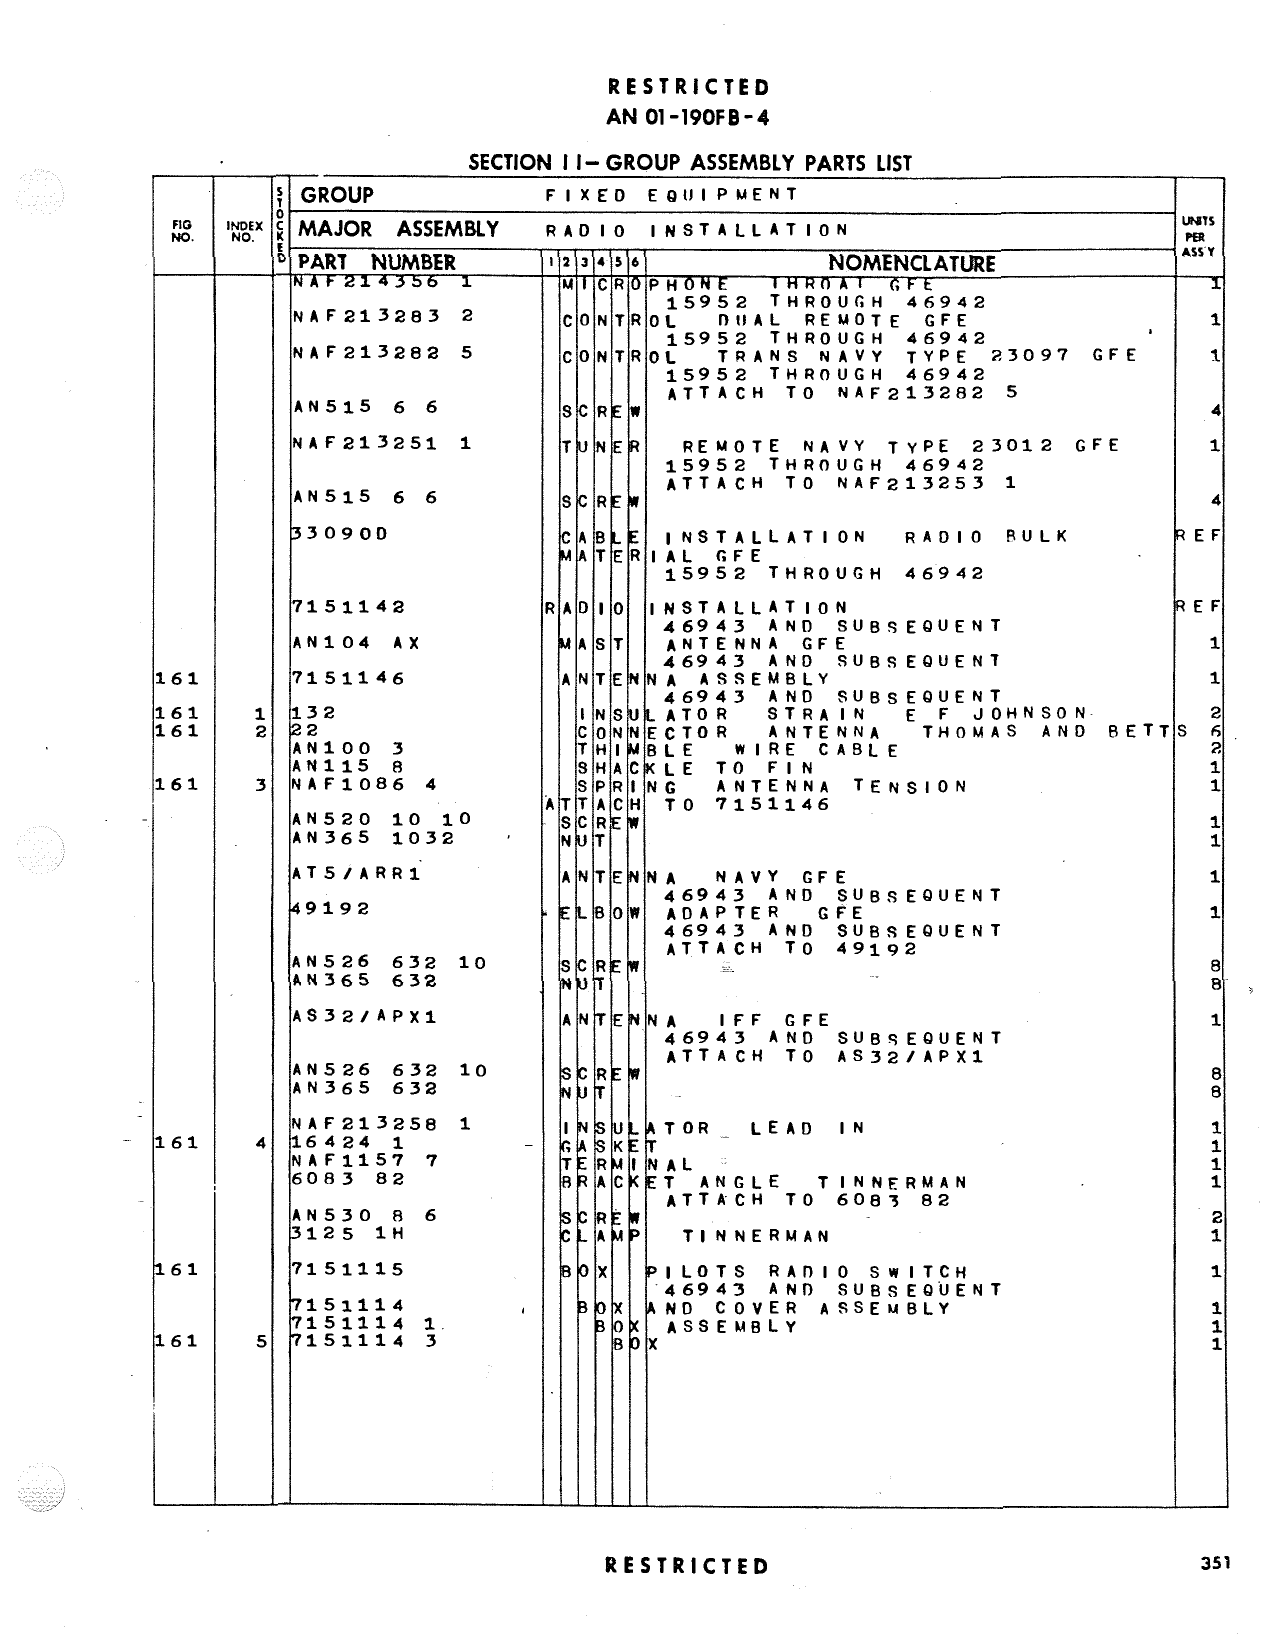 Sample page 357 from AirCorps Library document: Parts Catalog - FM-2